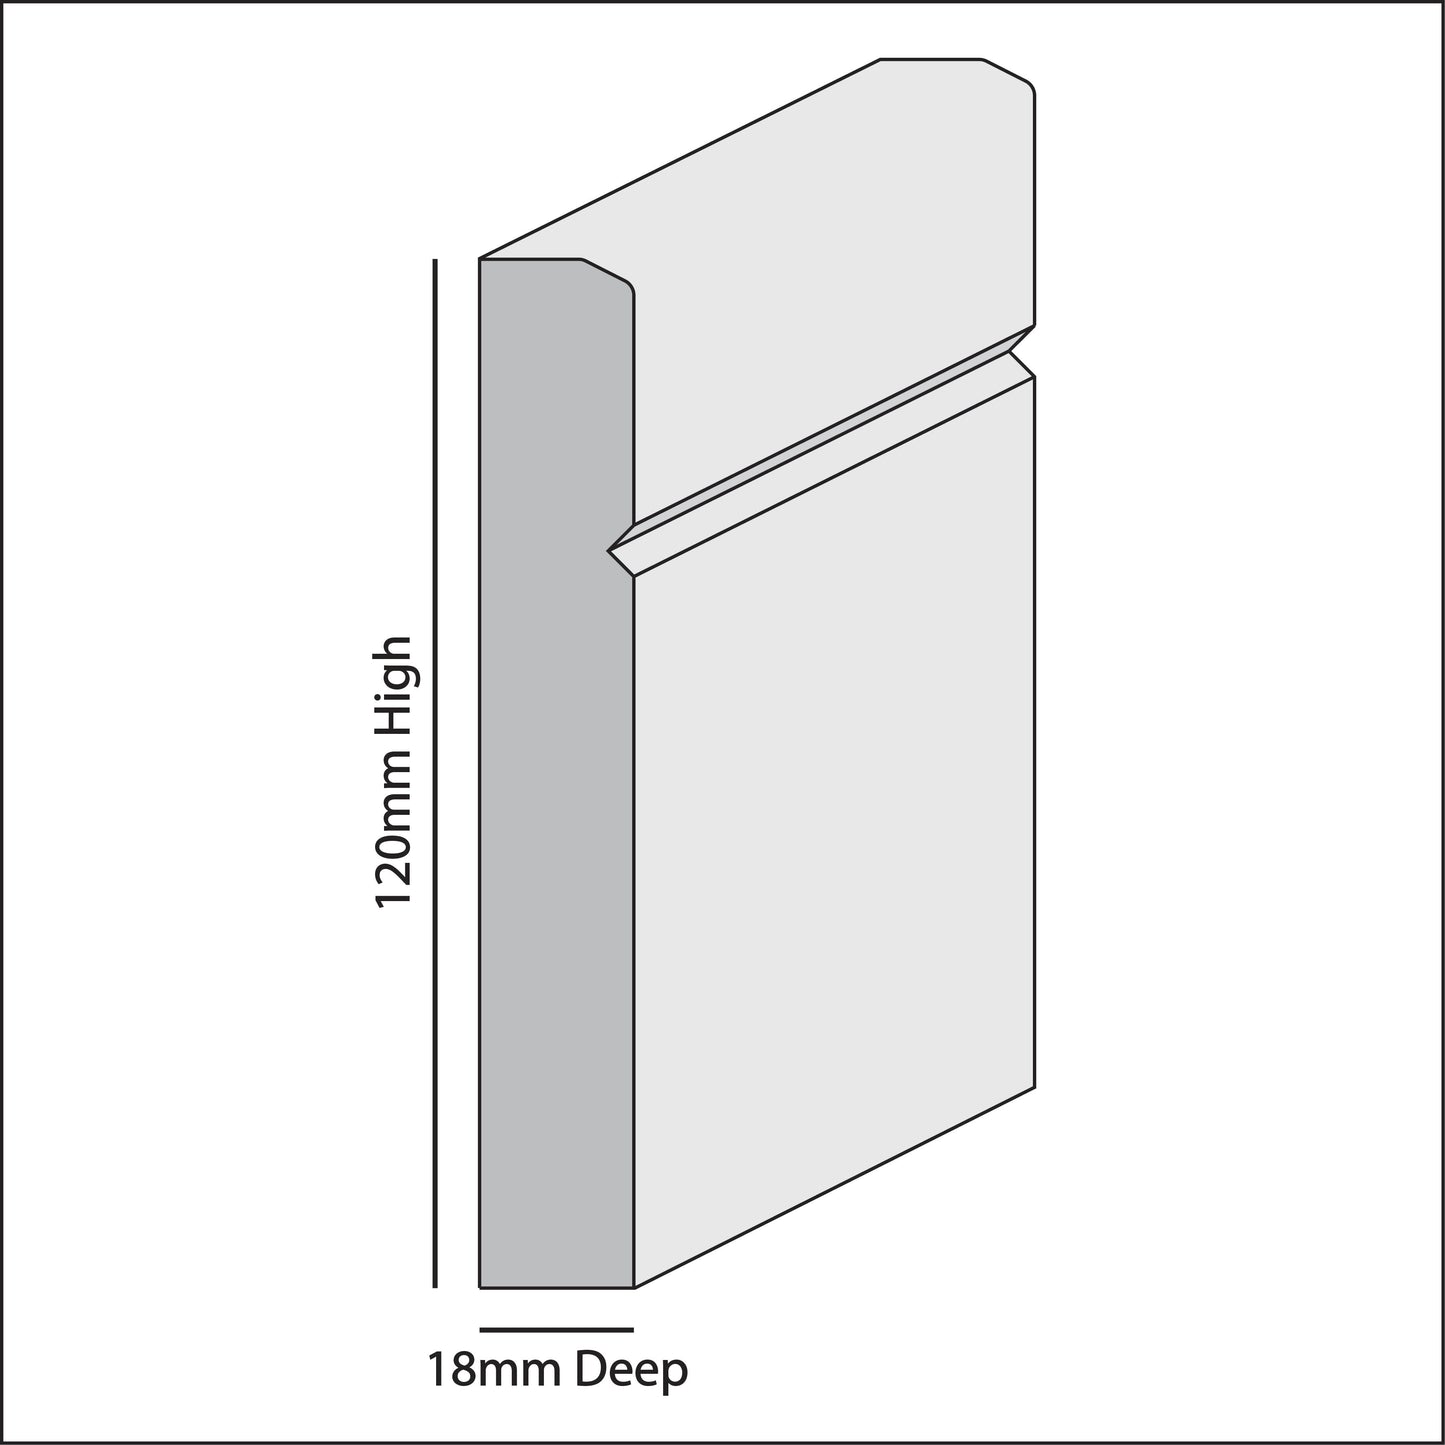 V Grooved Rounded Edge MDF Skirting Board 2.4m (L) x 120mm (H) x 18mm (D)